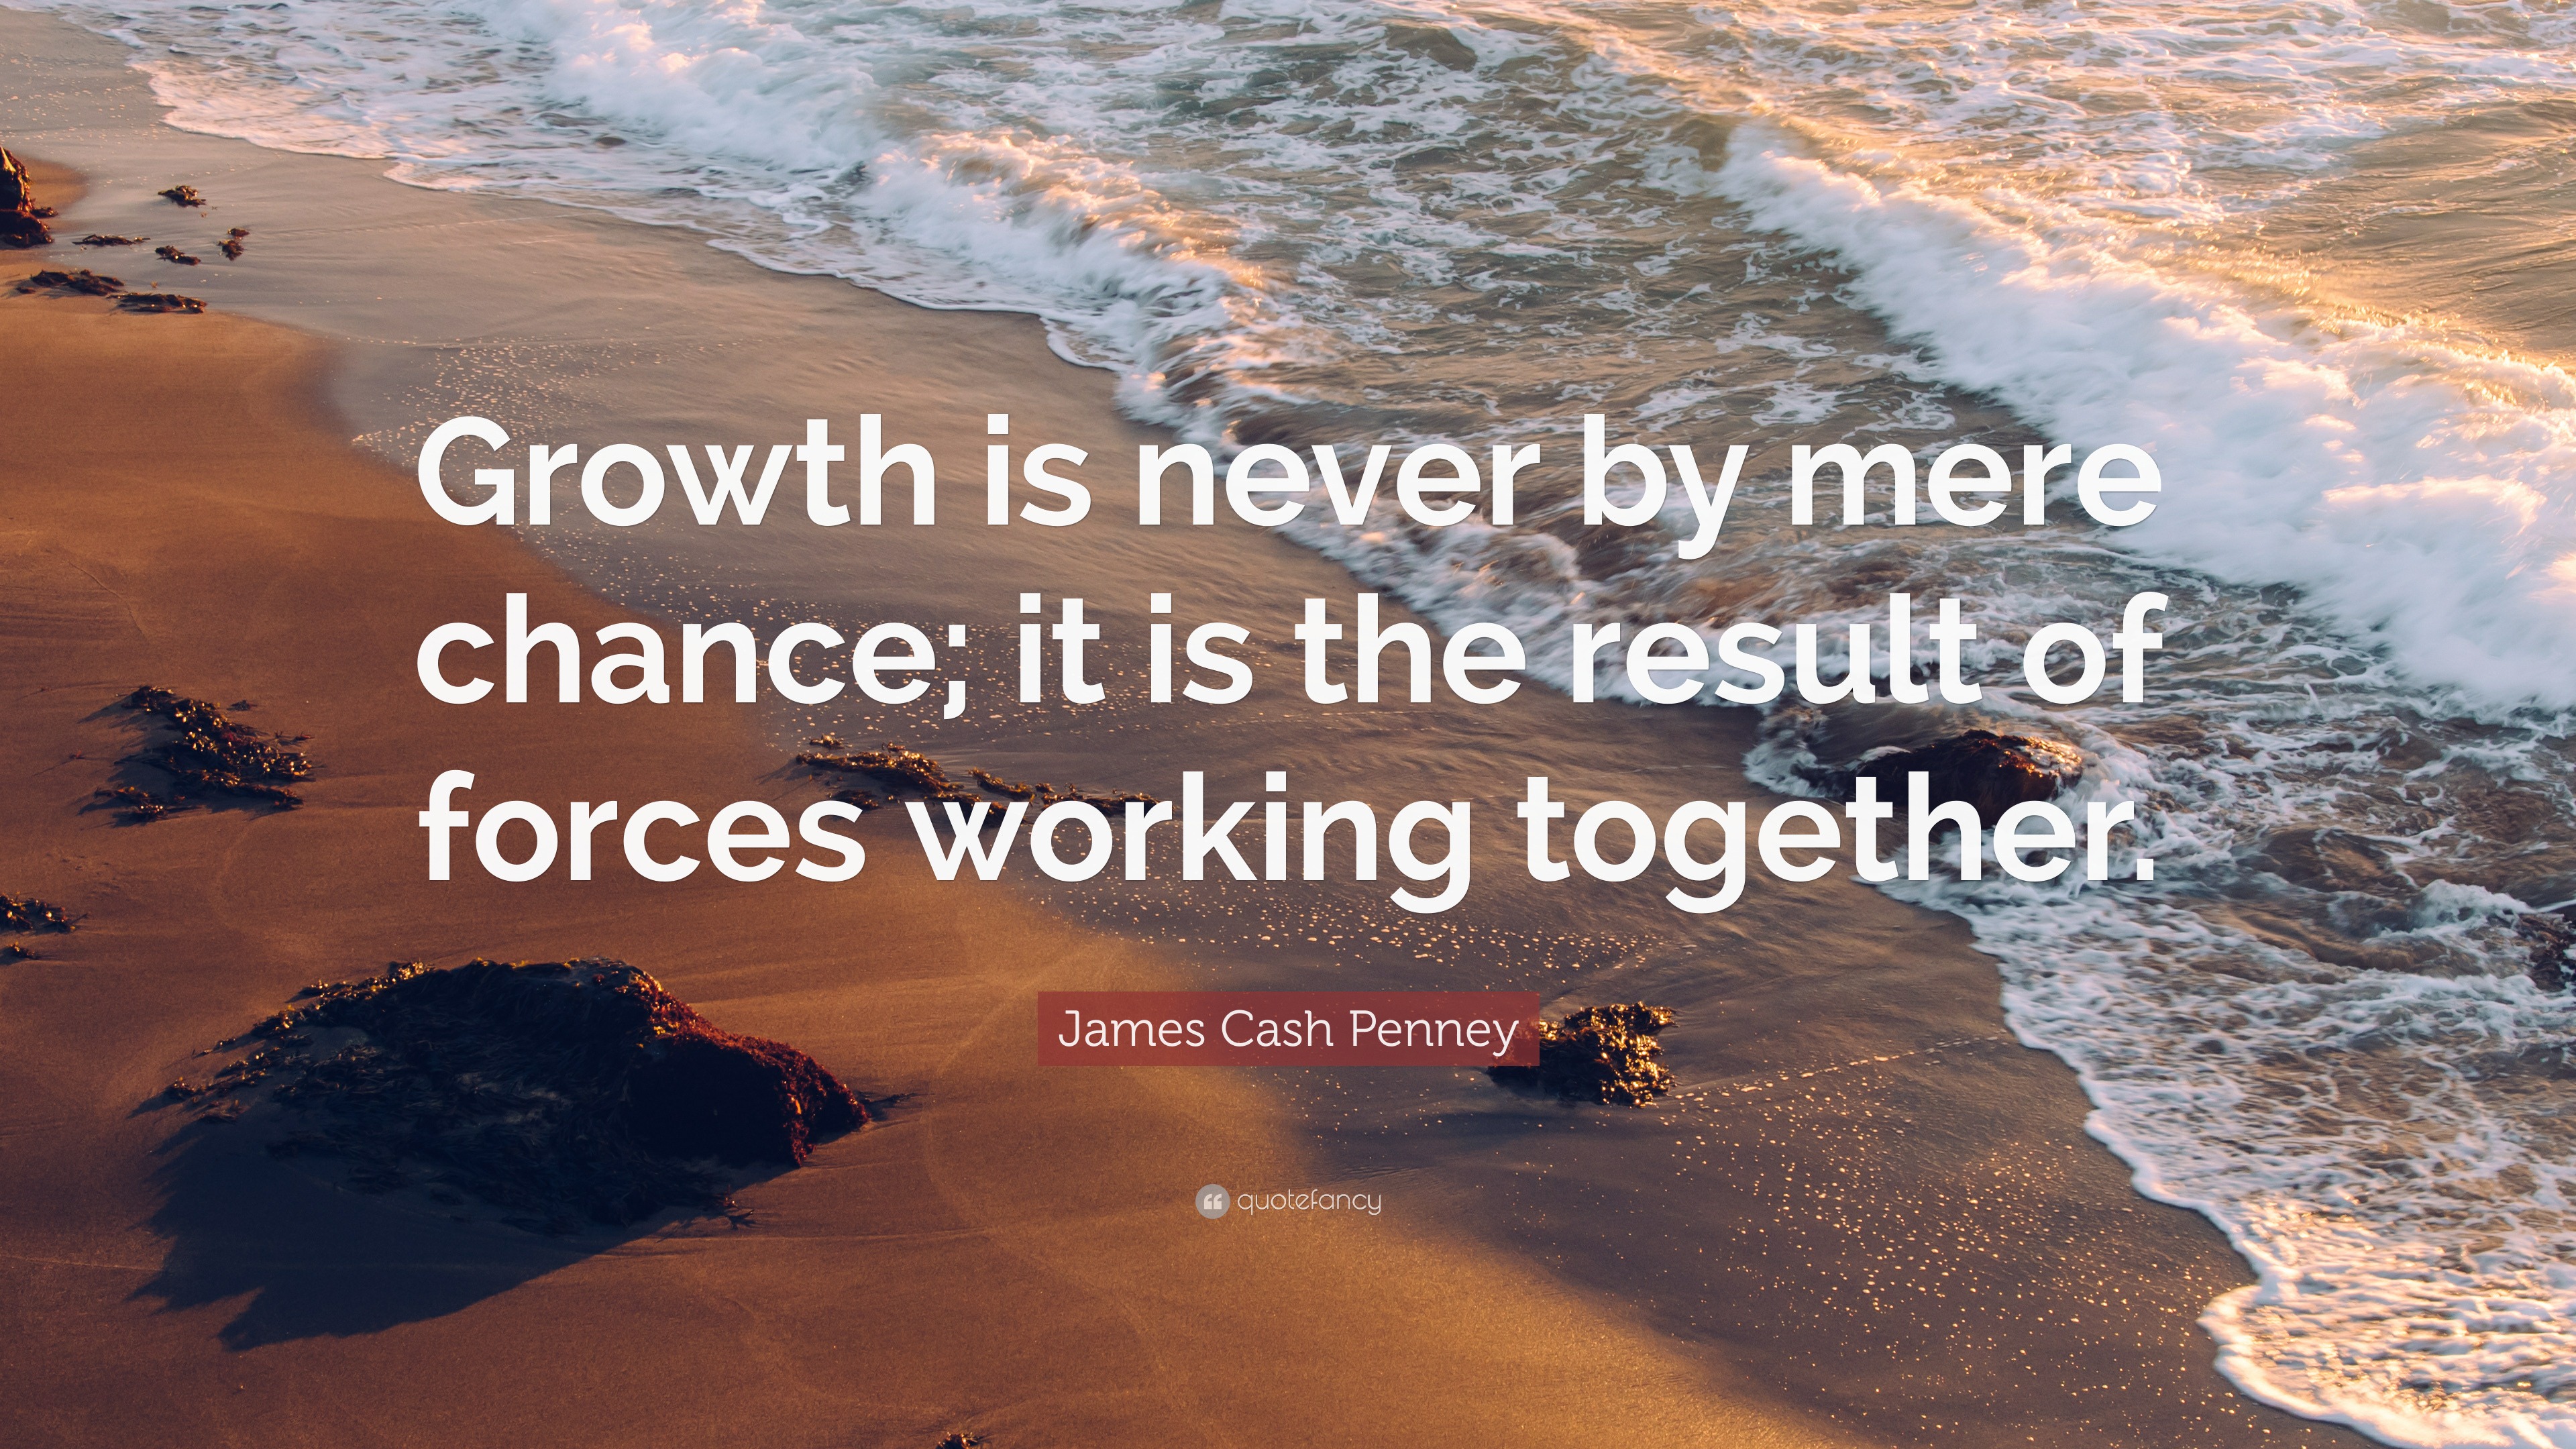 James Cash Penney Quote: “Growth is never by mere chance; it is the ...